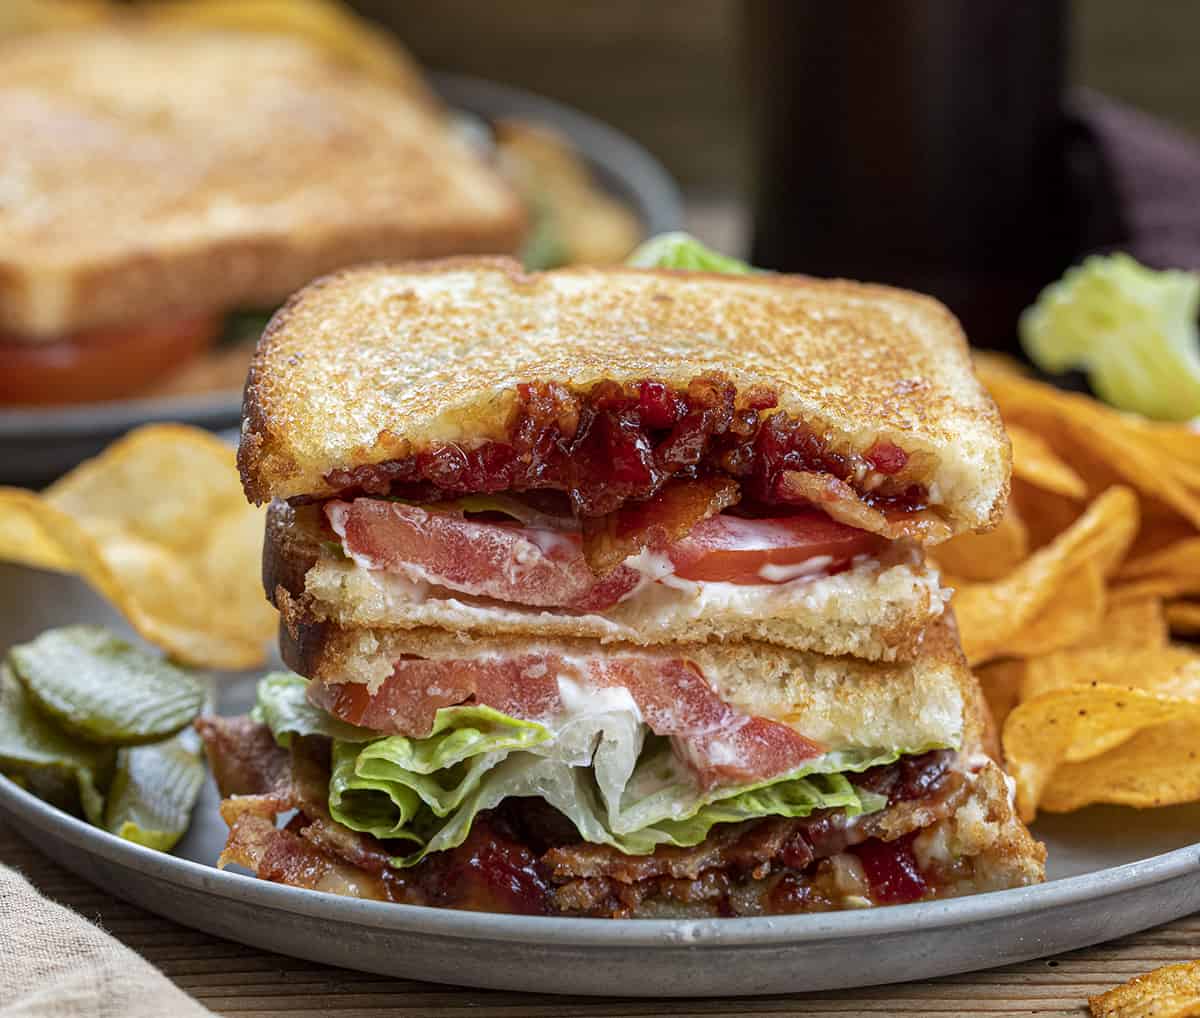 Stacked BLT with Bacon Tomato Jam on Plate with Chips. Dinner, Supper, Sandwich, Deluxe BLT, Tomato Jam Sandwich, How to Use Tomato Jam, Toasted BLT, recipes, i am homesteader, iamhomesteader